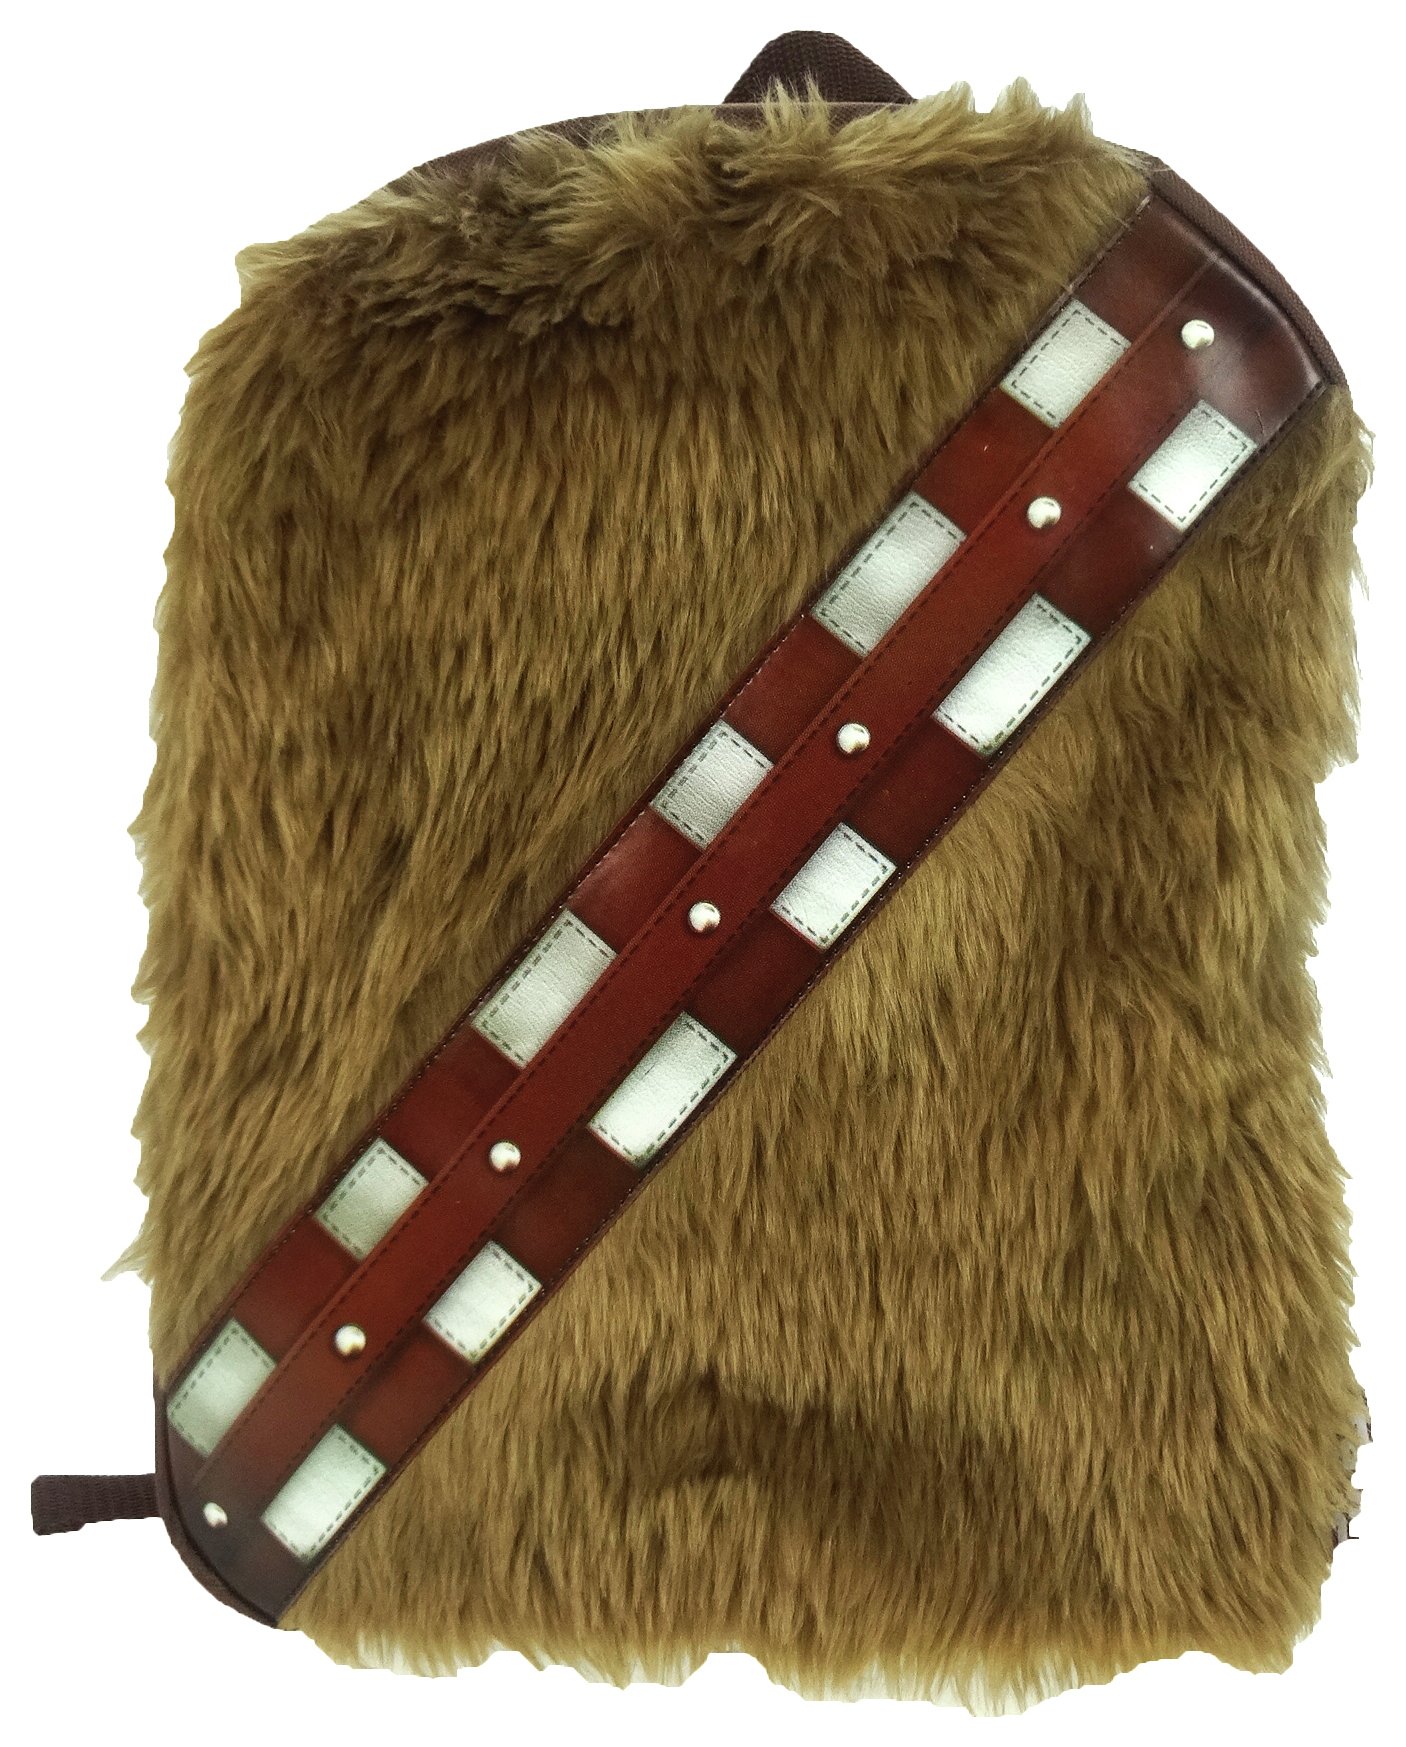 Star Wars - Novelty Backpack - Chewie Review